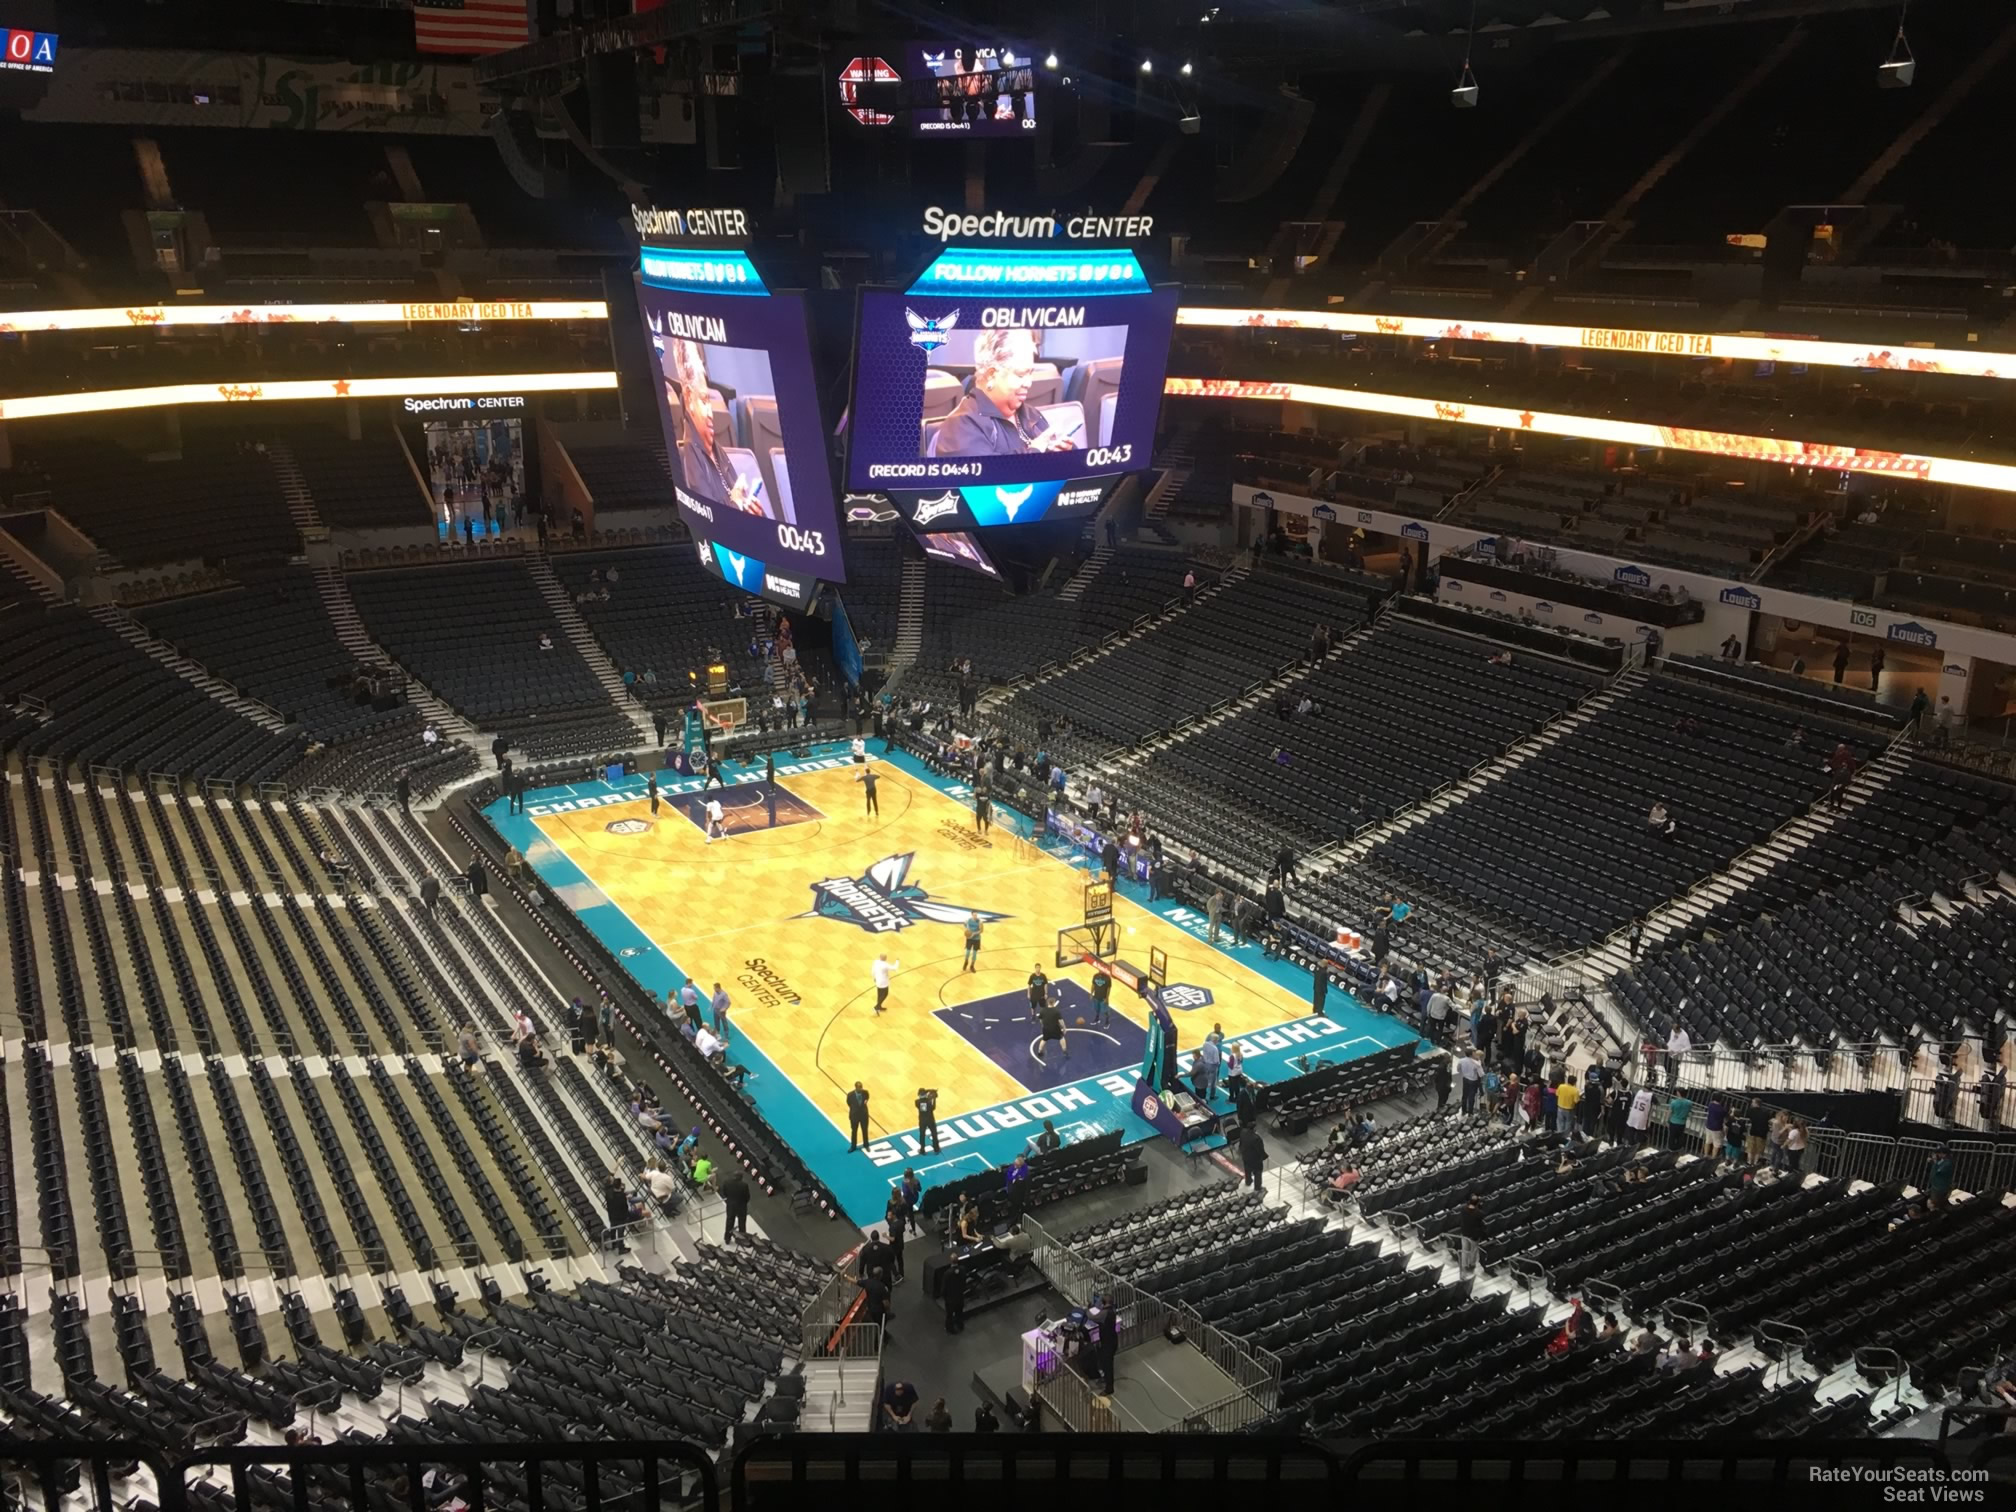 Section 220 at Spectrum Center Charlotte